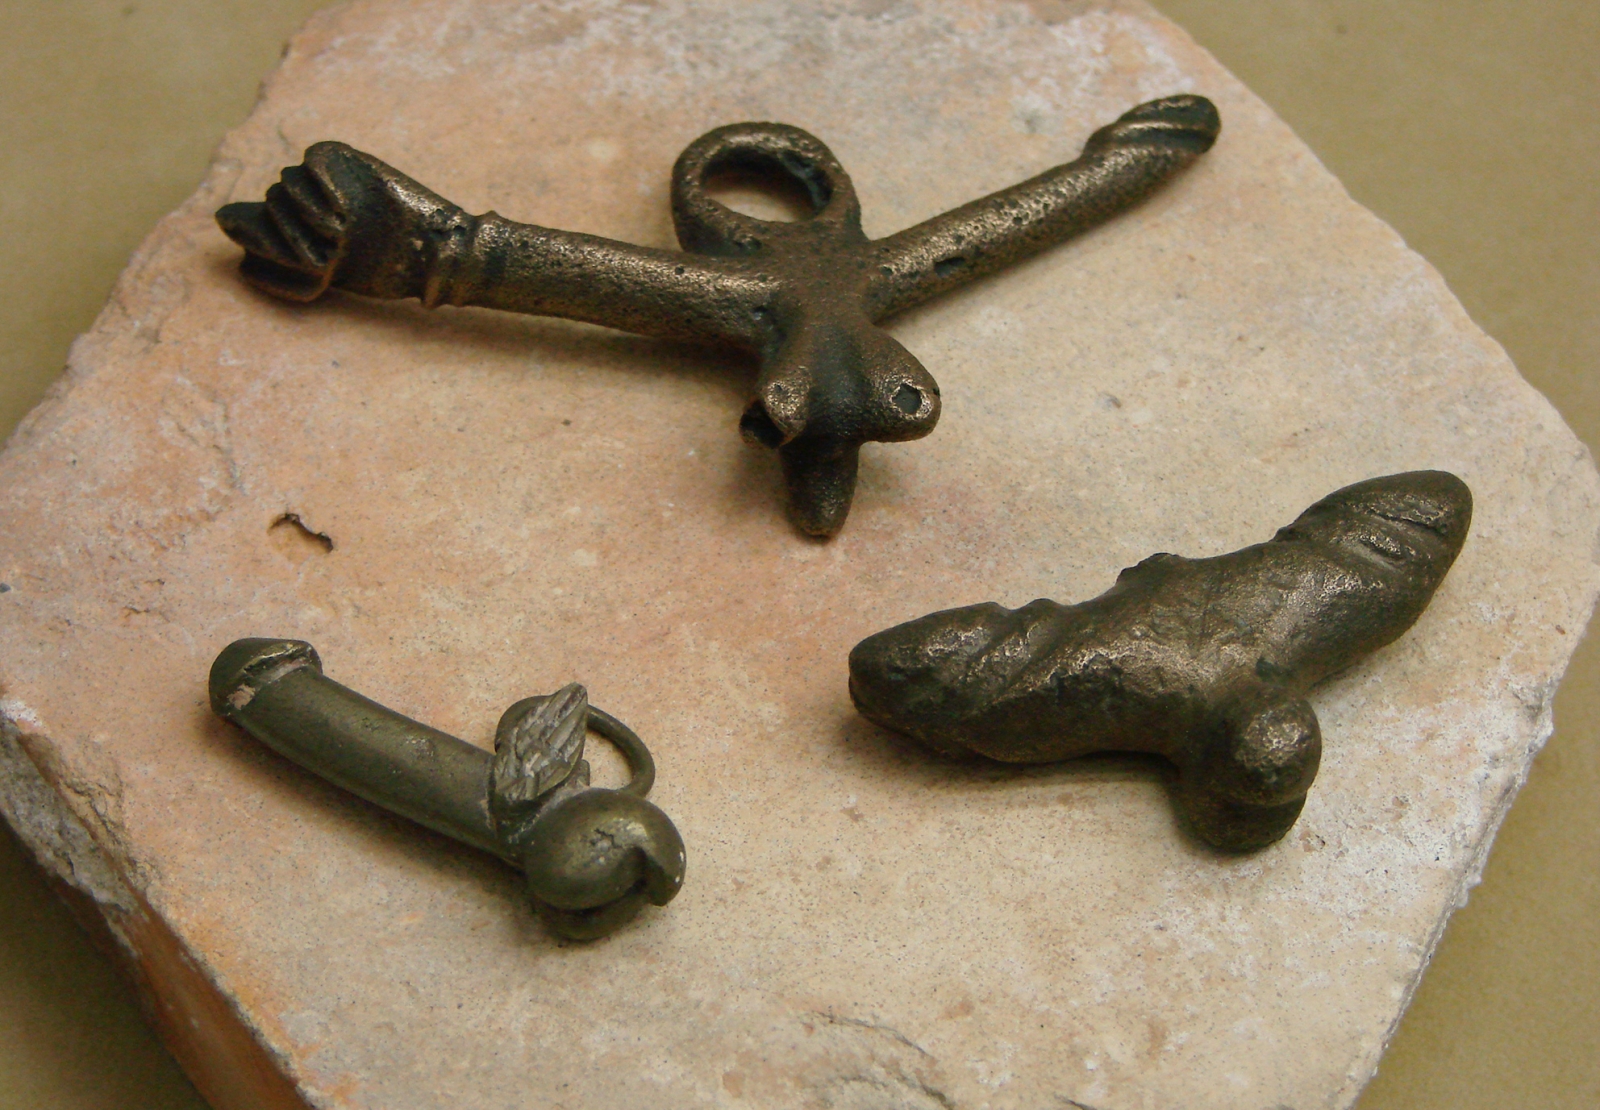 Magic Penis Amulets Protected Ancient Romans From The Evil Eye